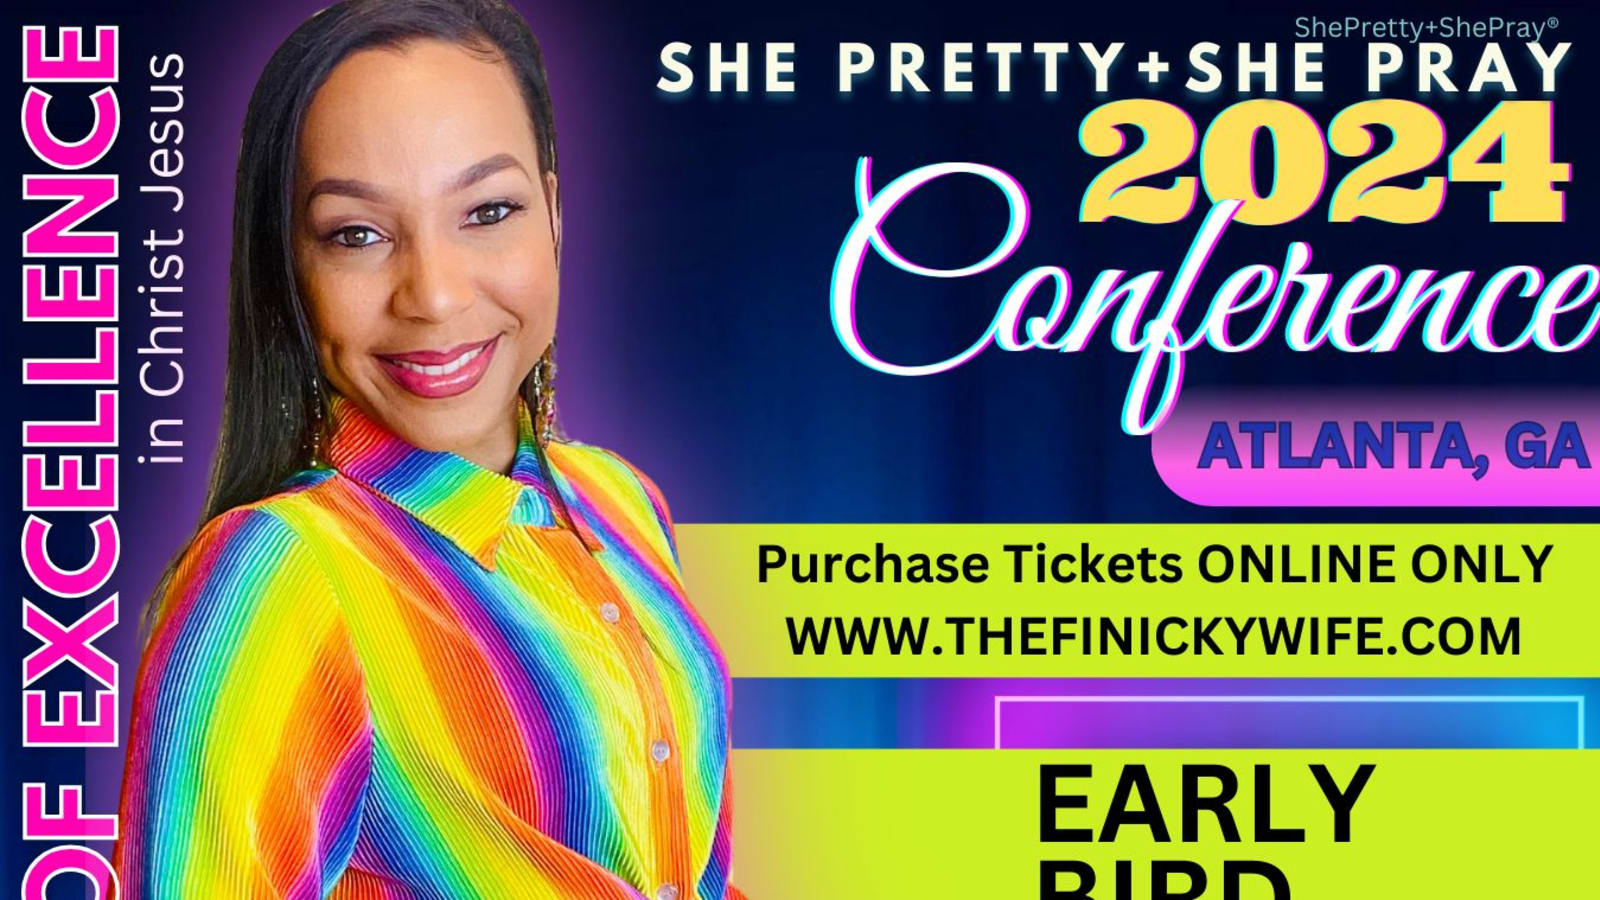 SHE PRETTYSHE PRAY SPIRIT OF EXCELLENCE CONFERENCE